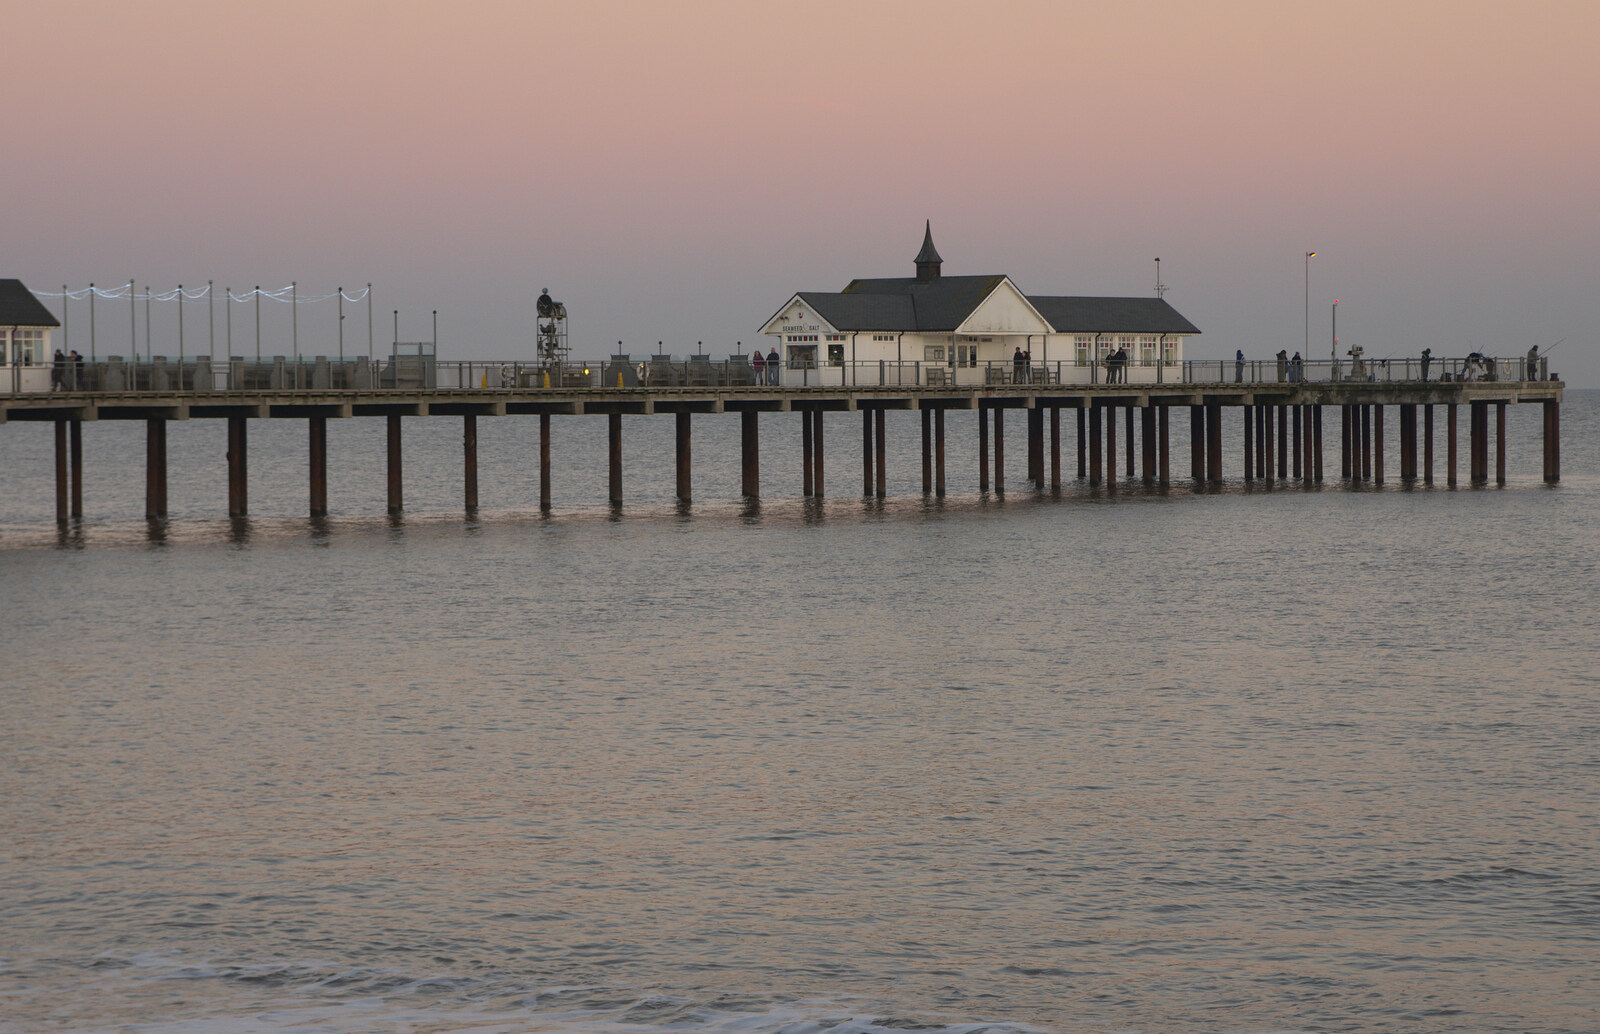 The pier in the dusk from Sunset on the Beach, Southwold, Suffolk - 30th December 2014